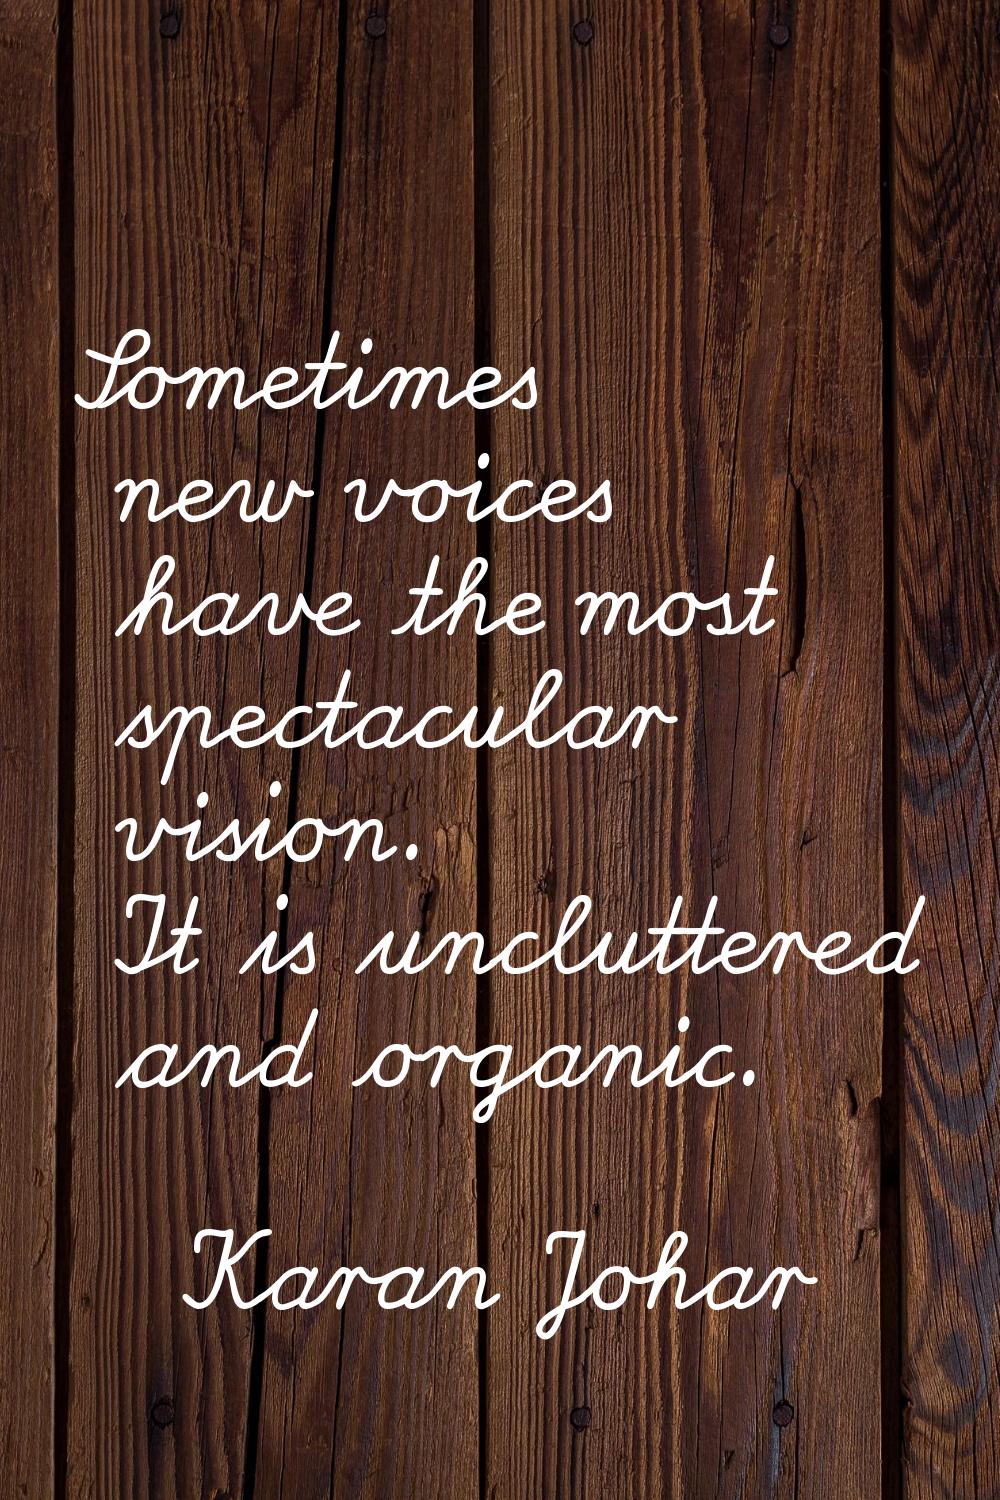 Sometimes new voices have the most spectacular vision. It is uncluttered and organic.